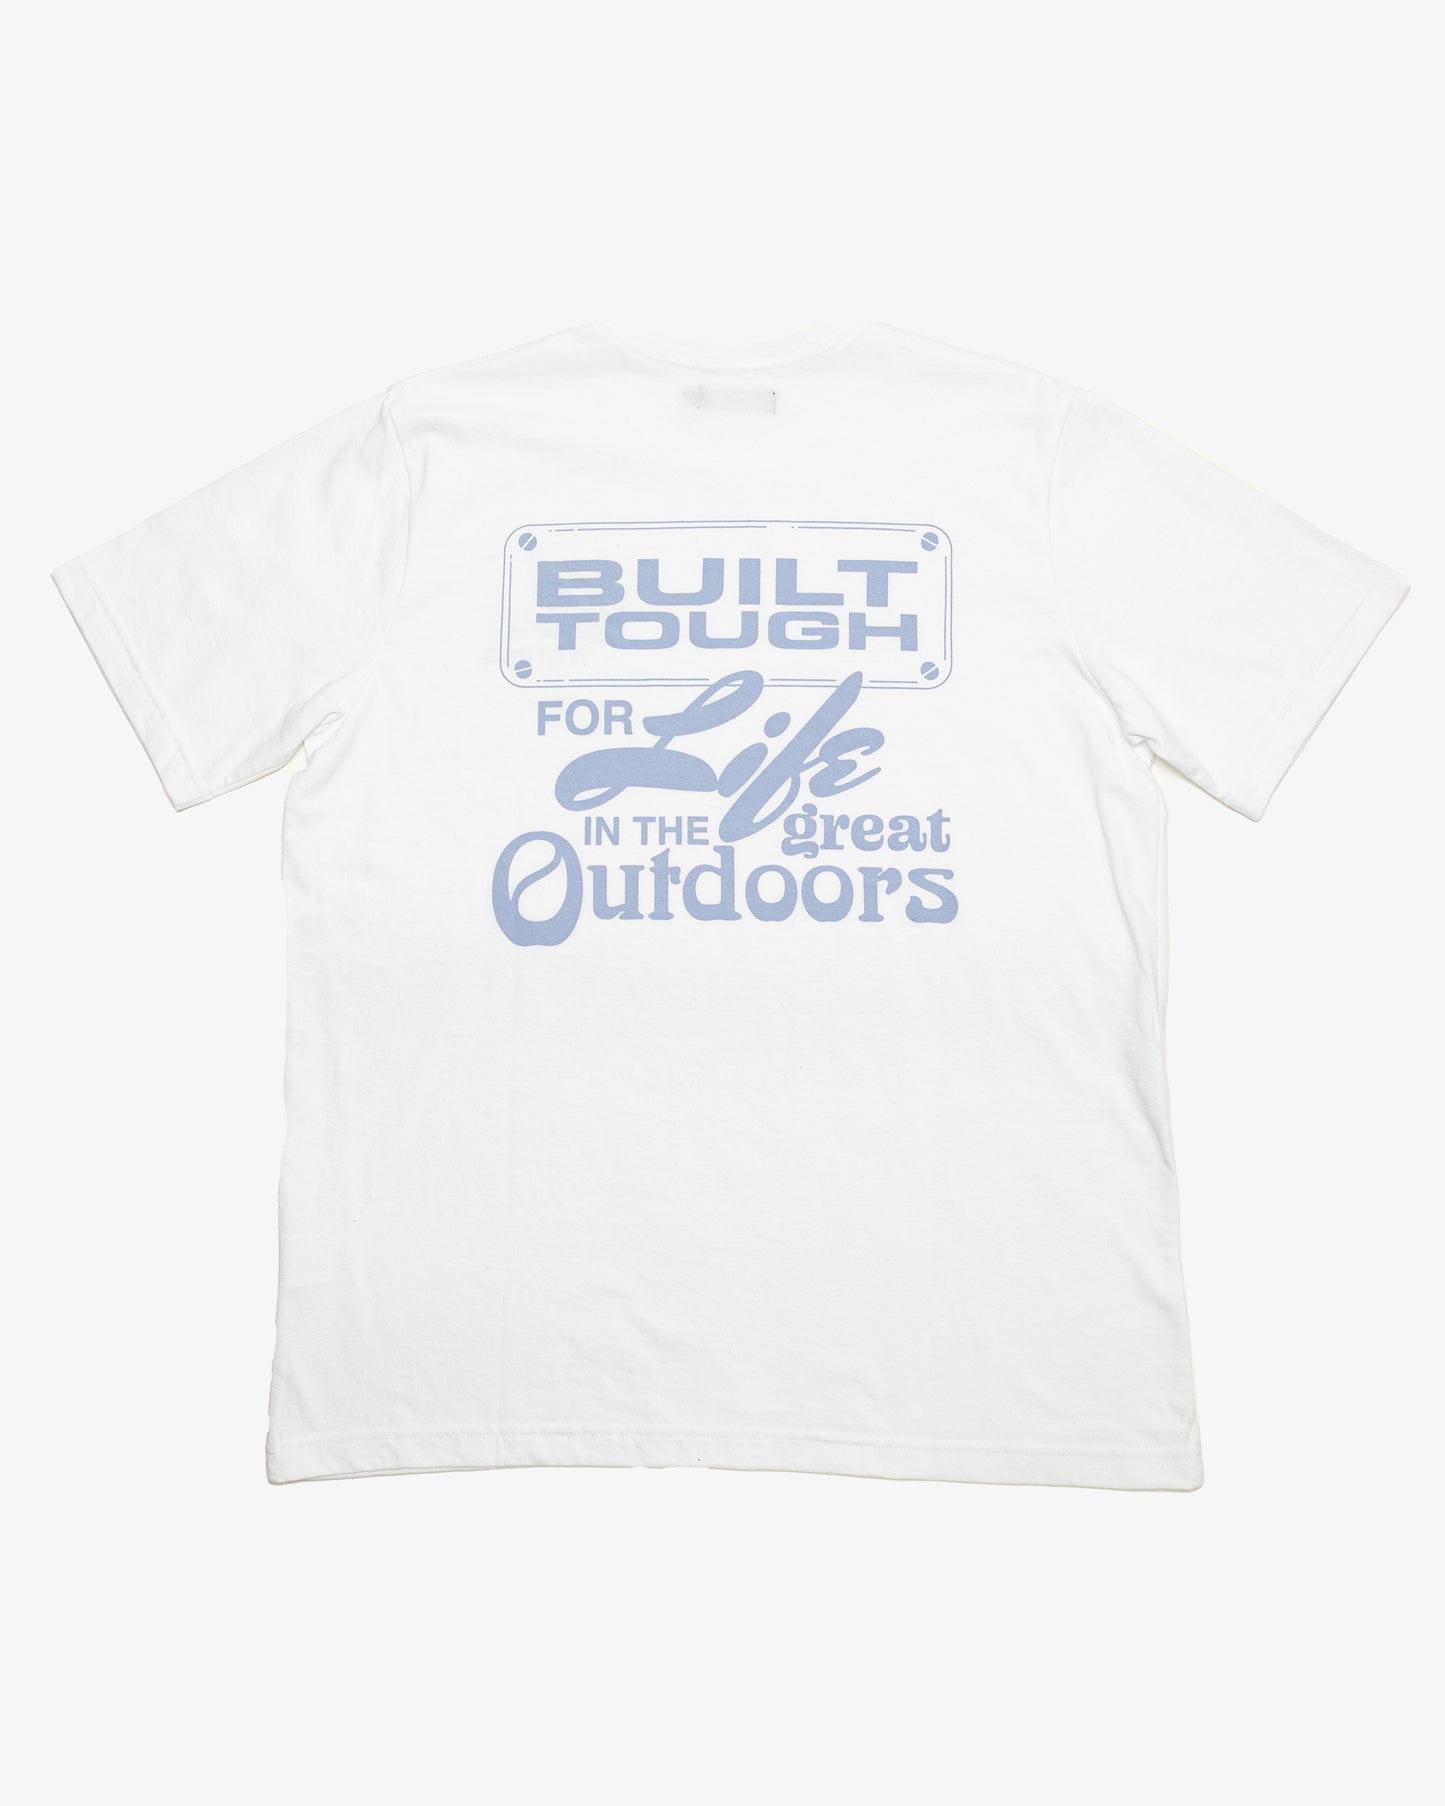 RAISED BY WOLVES - BUILT TOUGH TEE